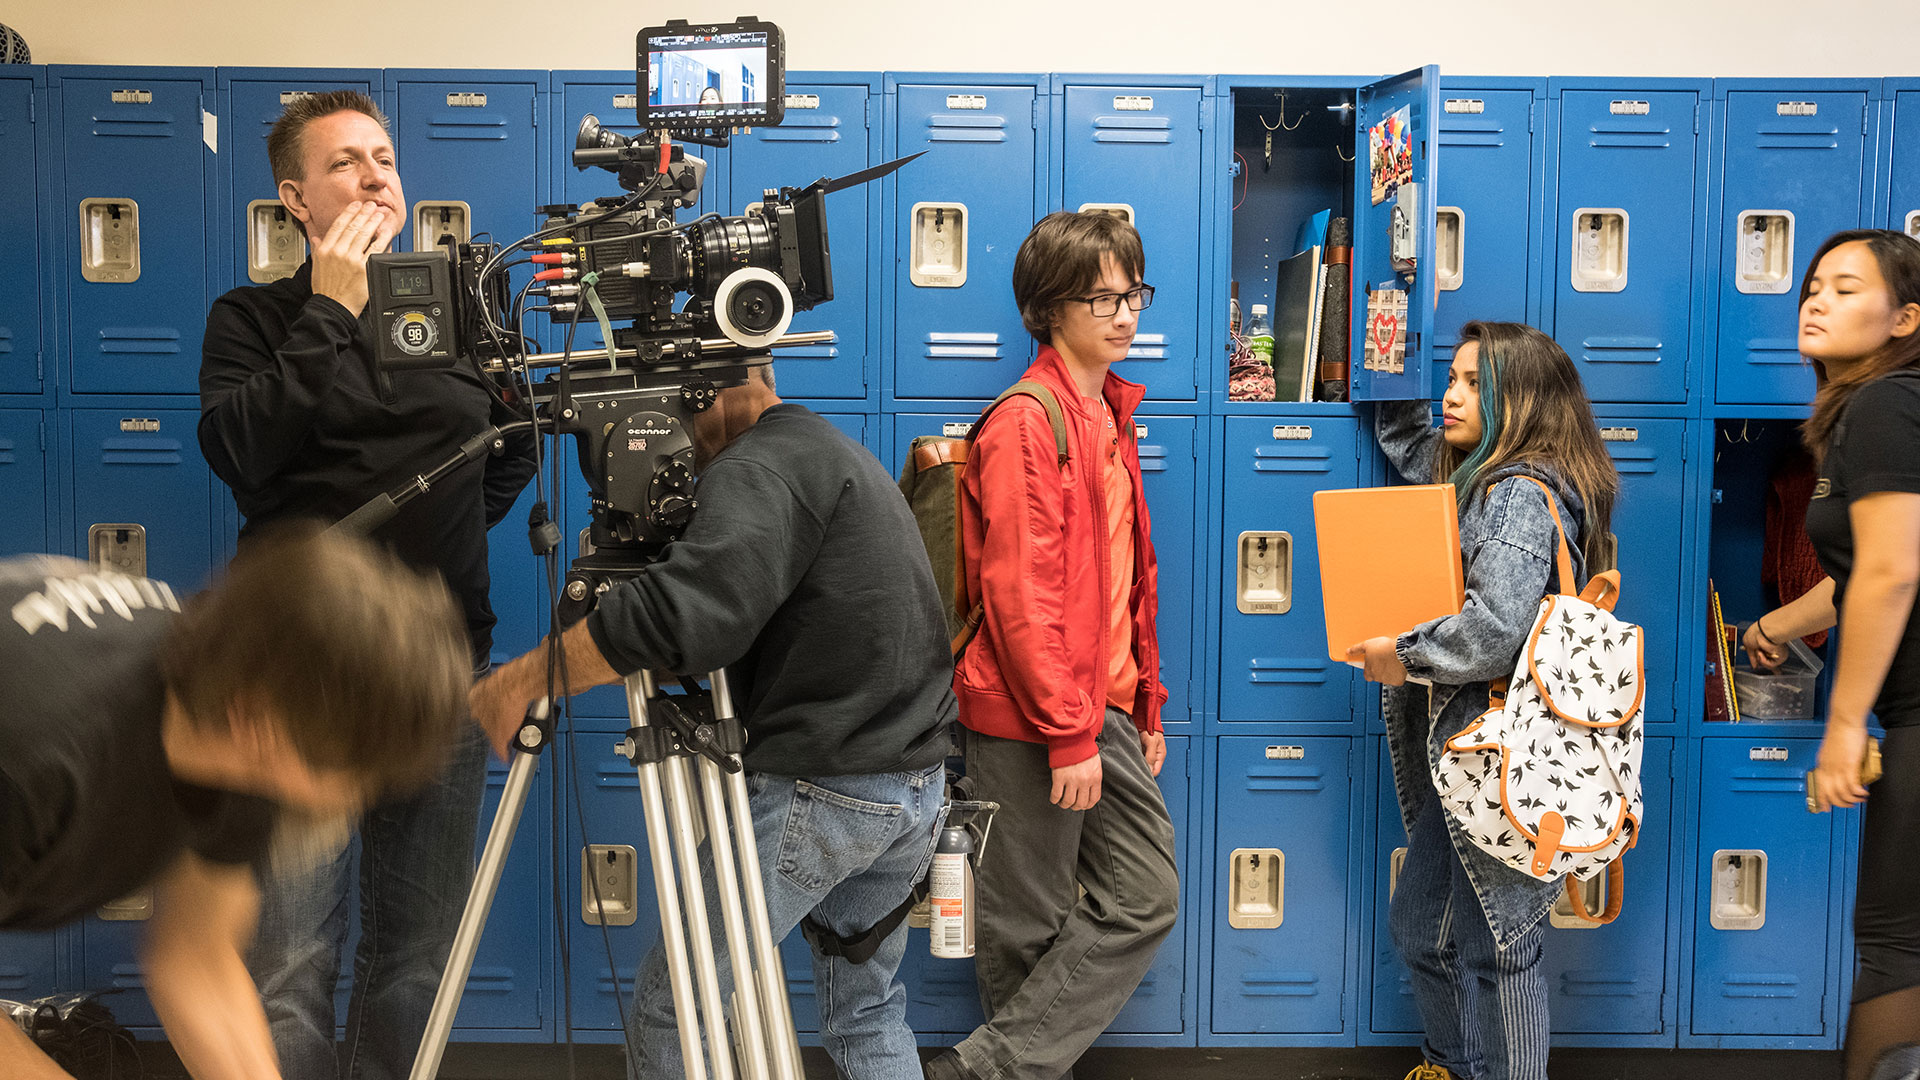 The cast and crew shot scenes at Ginelsa's alma mater, Jefferson High School in Daly City, for both the first "Lumpia" movie and "Lumpia With a Vengeance."